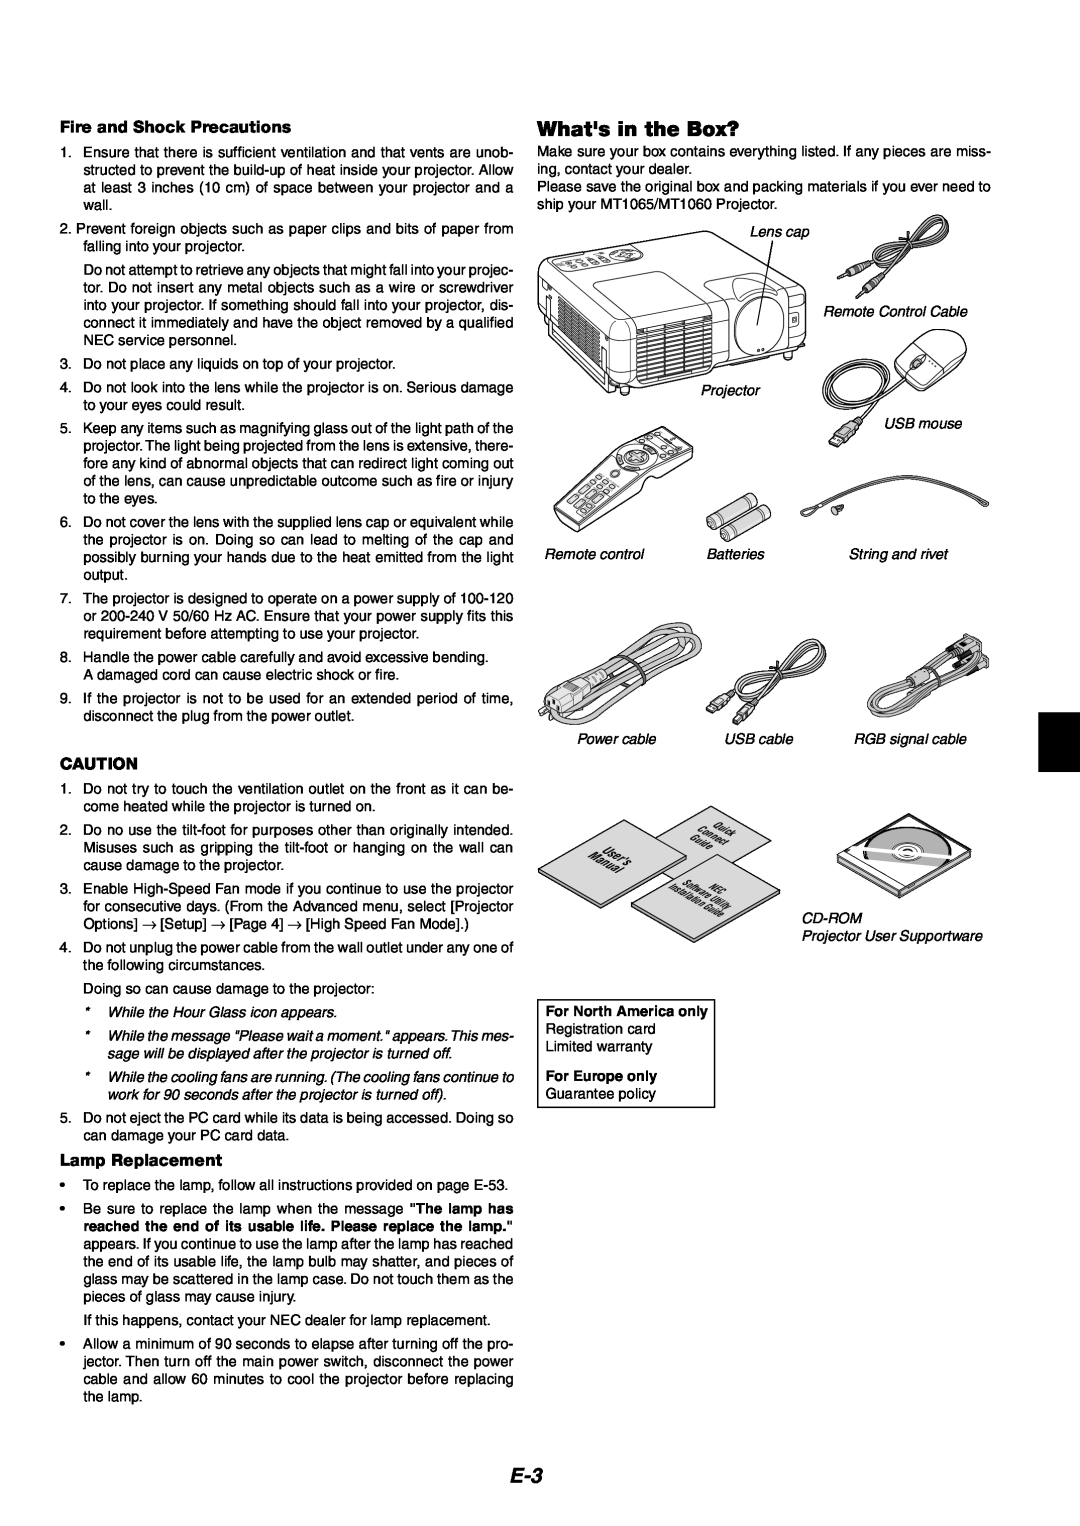 NEC MT1060 user manual Whats in the Box?, Fire and Shock Precautions, Lamp Replacement 